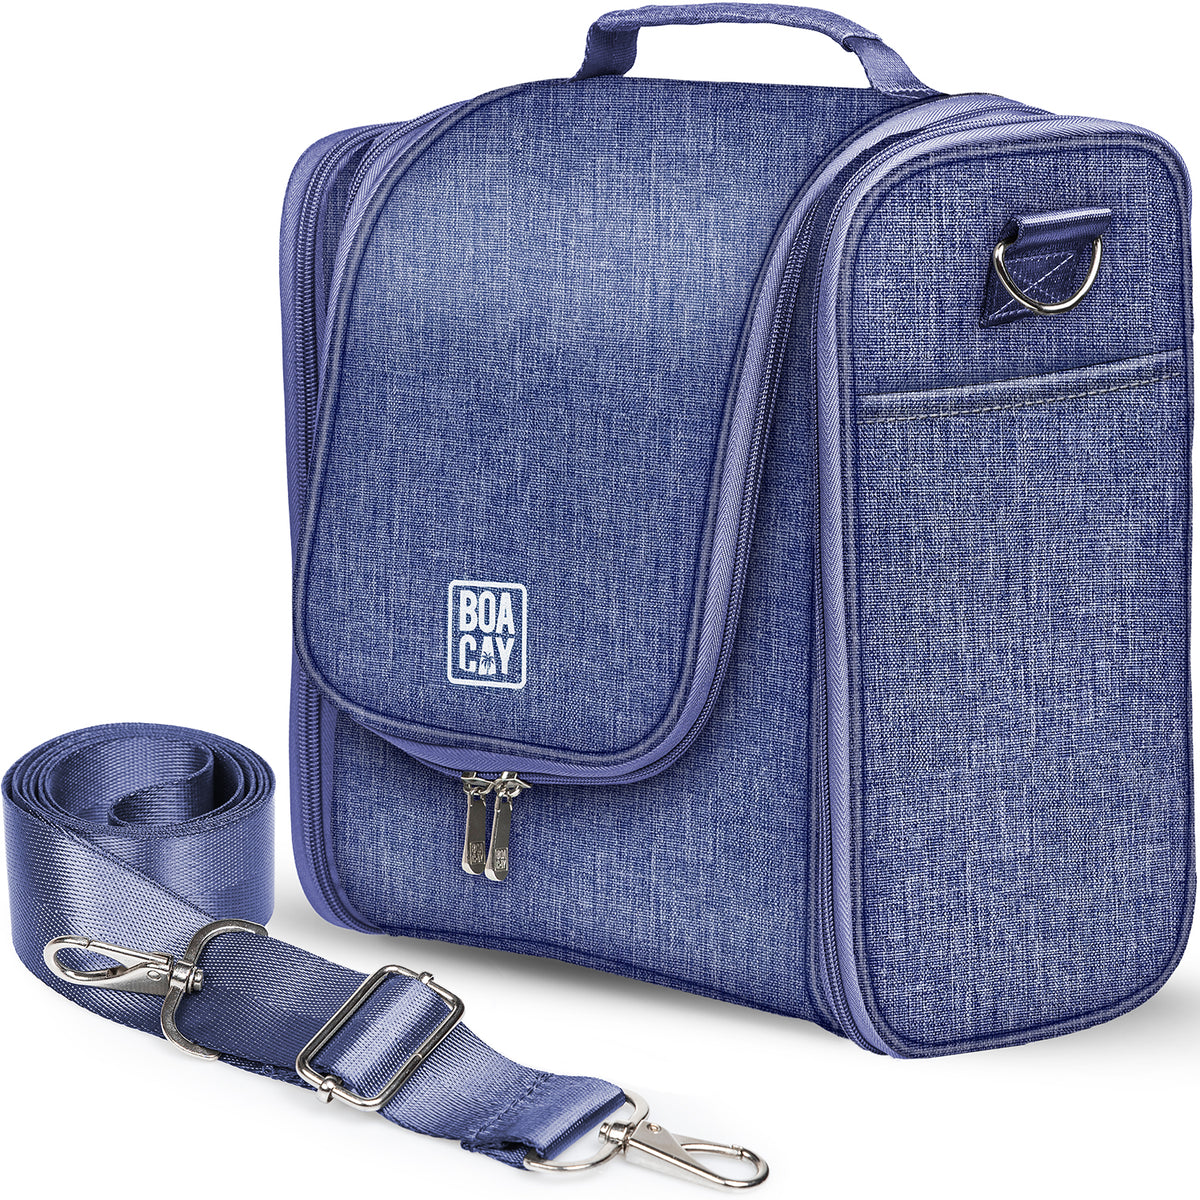 Extra-Large Collapsible Hanging Toiletry Bag - Violet Blue